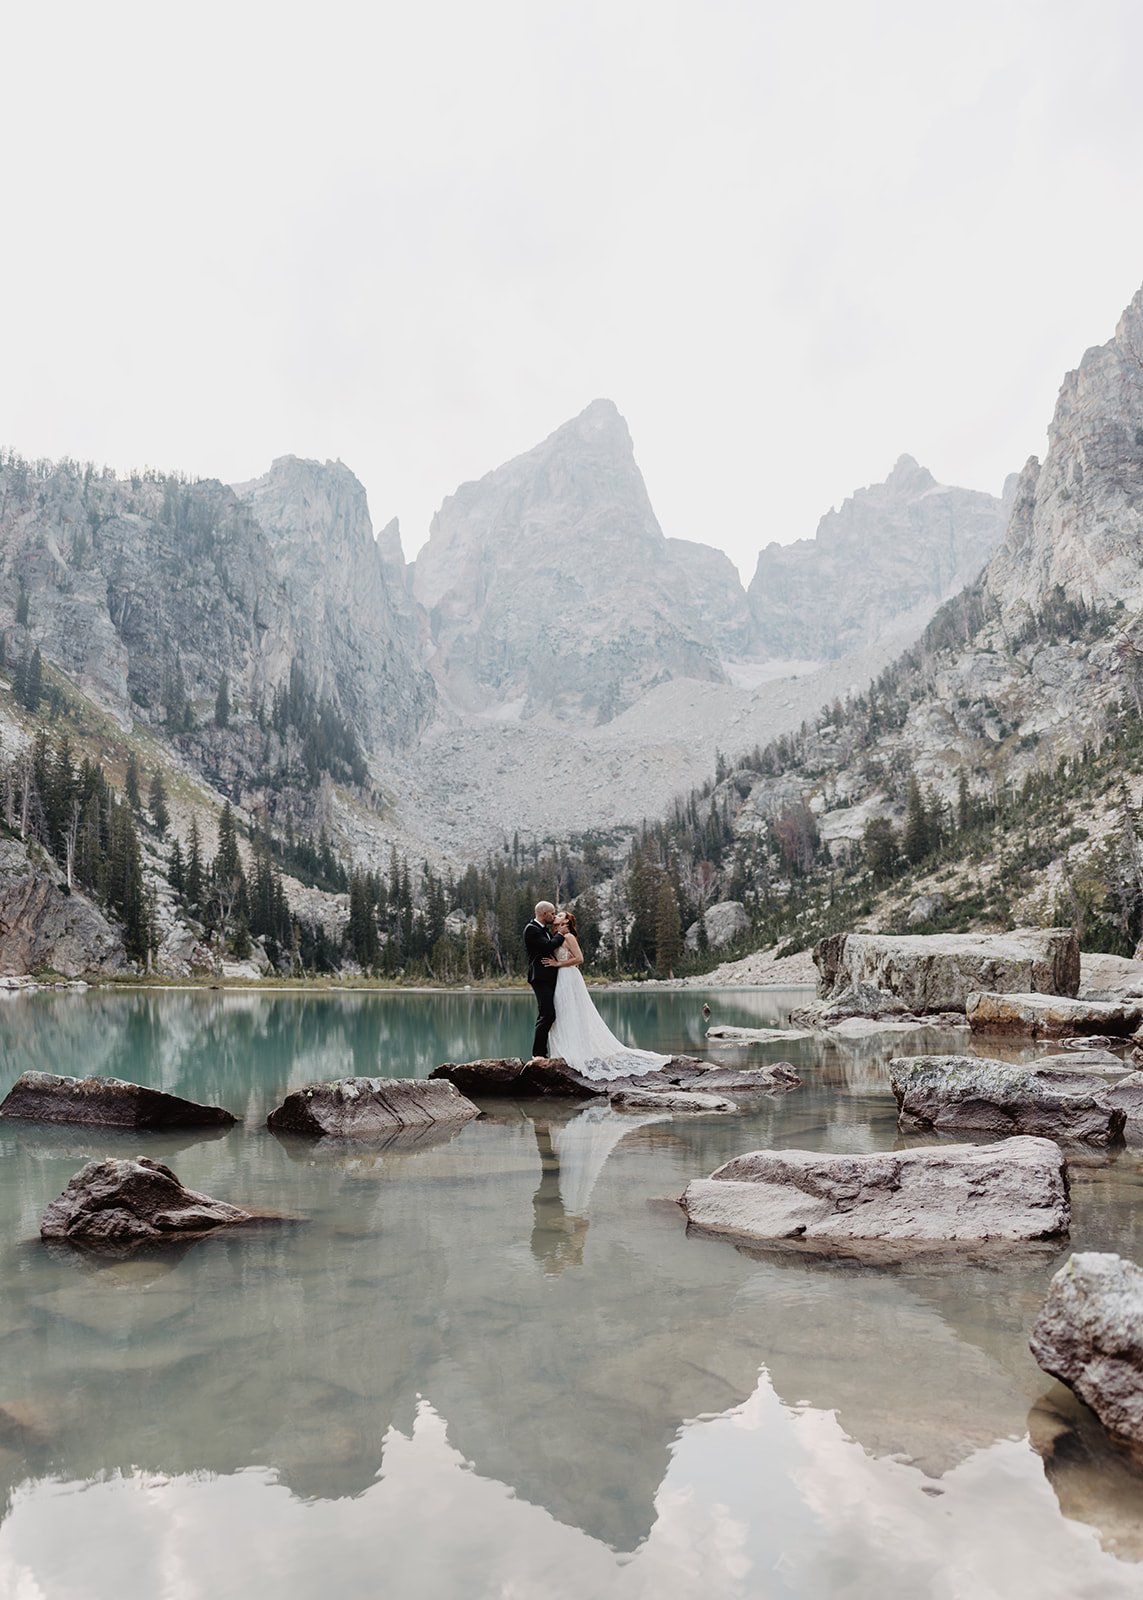 man and woman standing on rocks in a glacier lake in the valley of the Tetons mountains with aqua blue water surrounding them as they kiss on their wedding daywith the Tetons in the background and reflecting into the lake